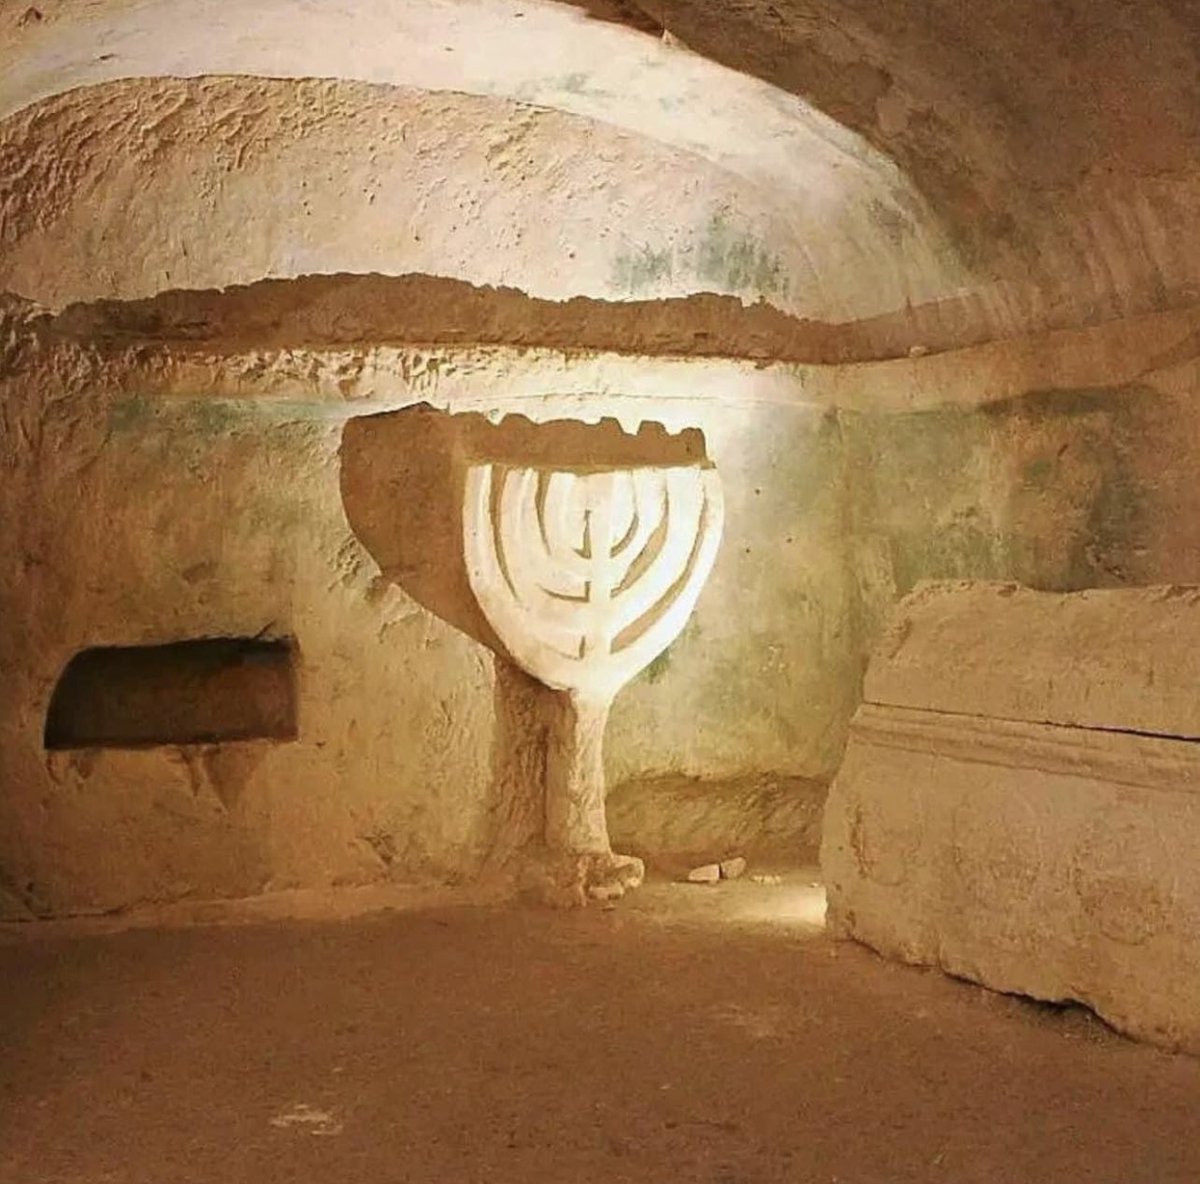 Our roots run deep. 

The Beit She’arim necropolis near Haifa where Jews were laid to rest 1800 years go. This is not to be confused with the traditional Hannukkah menorah…but proof of the existence of Jewish life in Israel millennia ago…